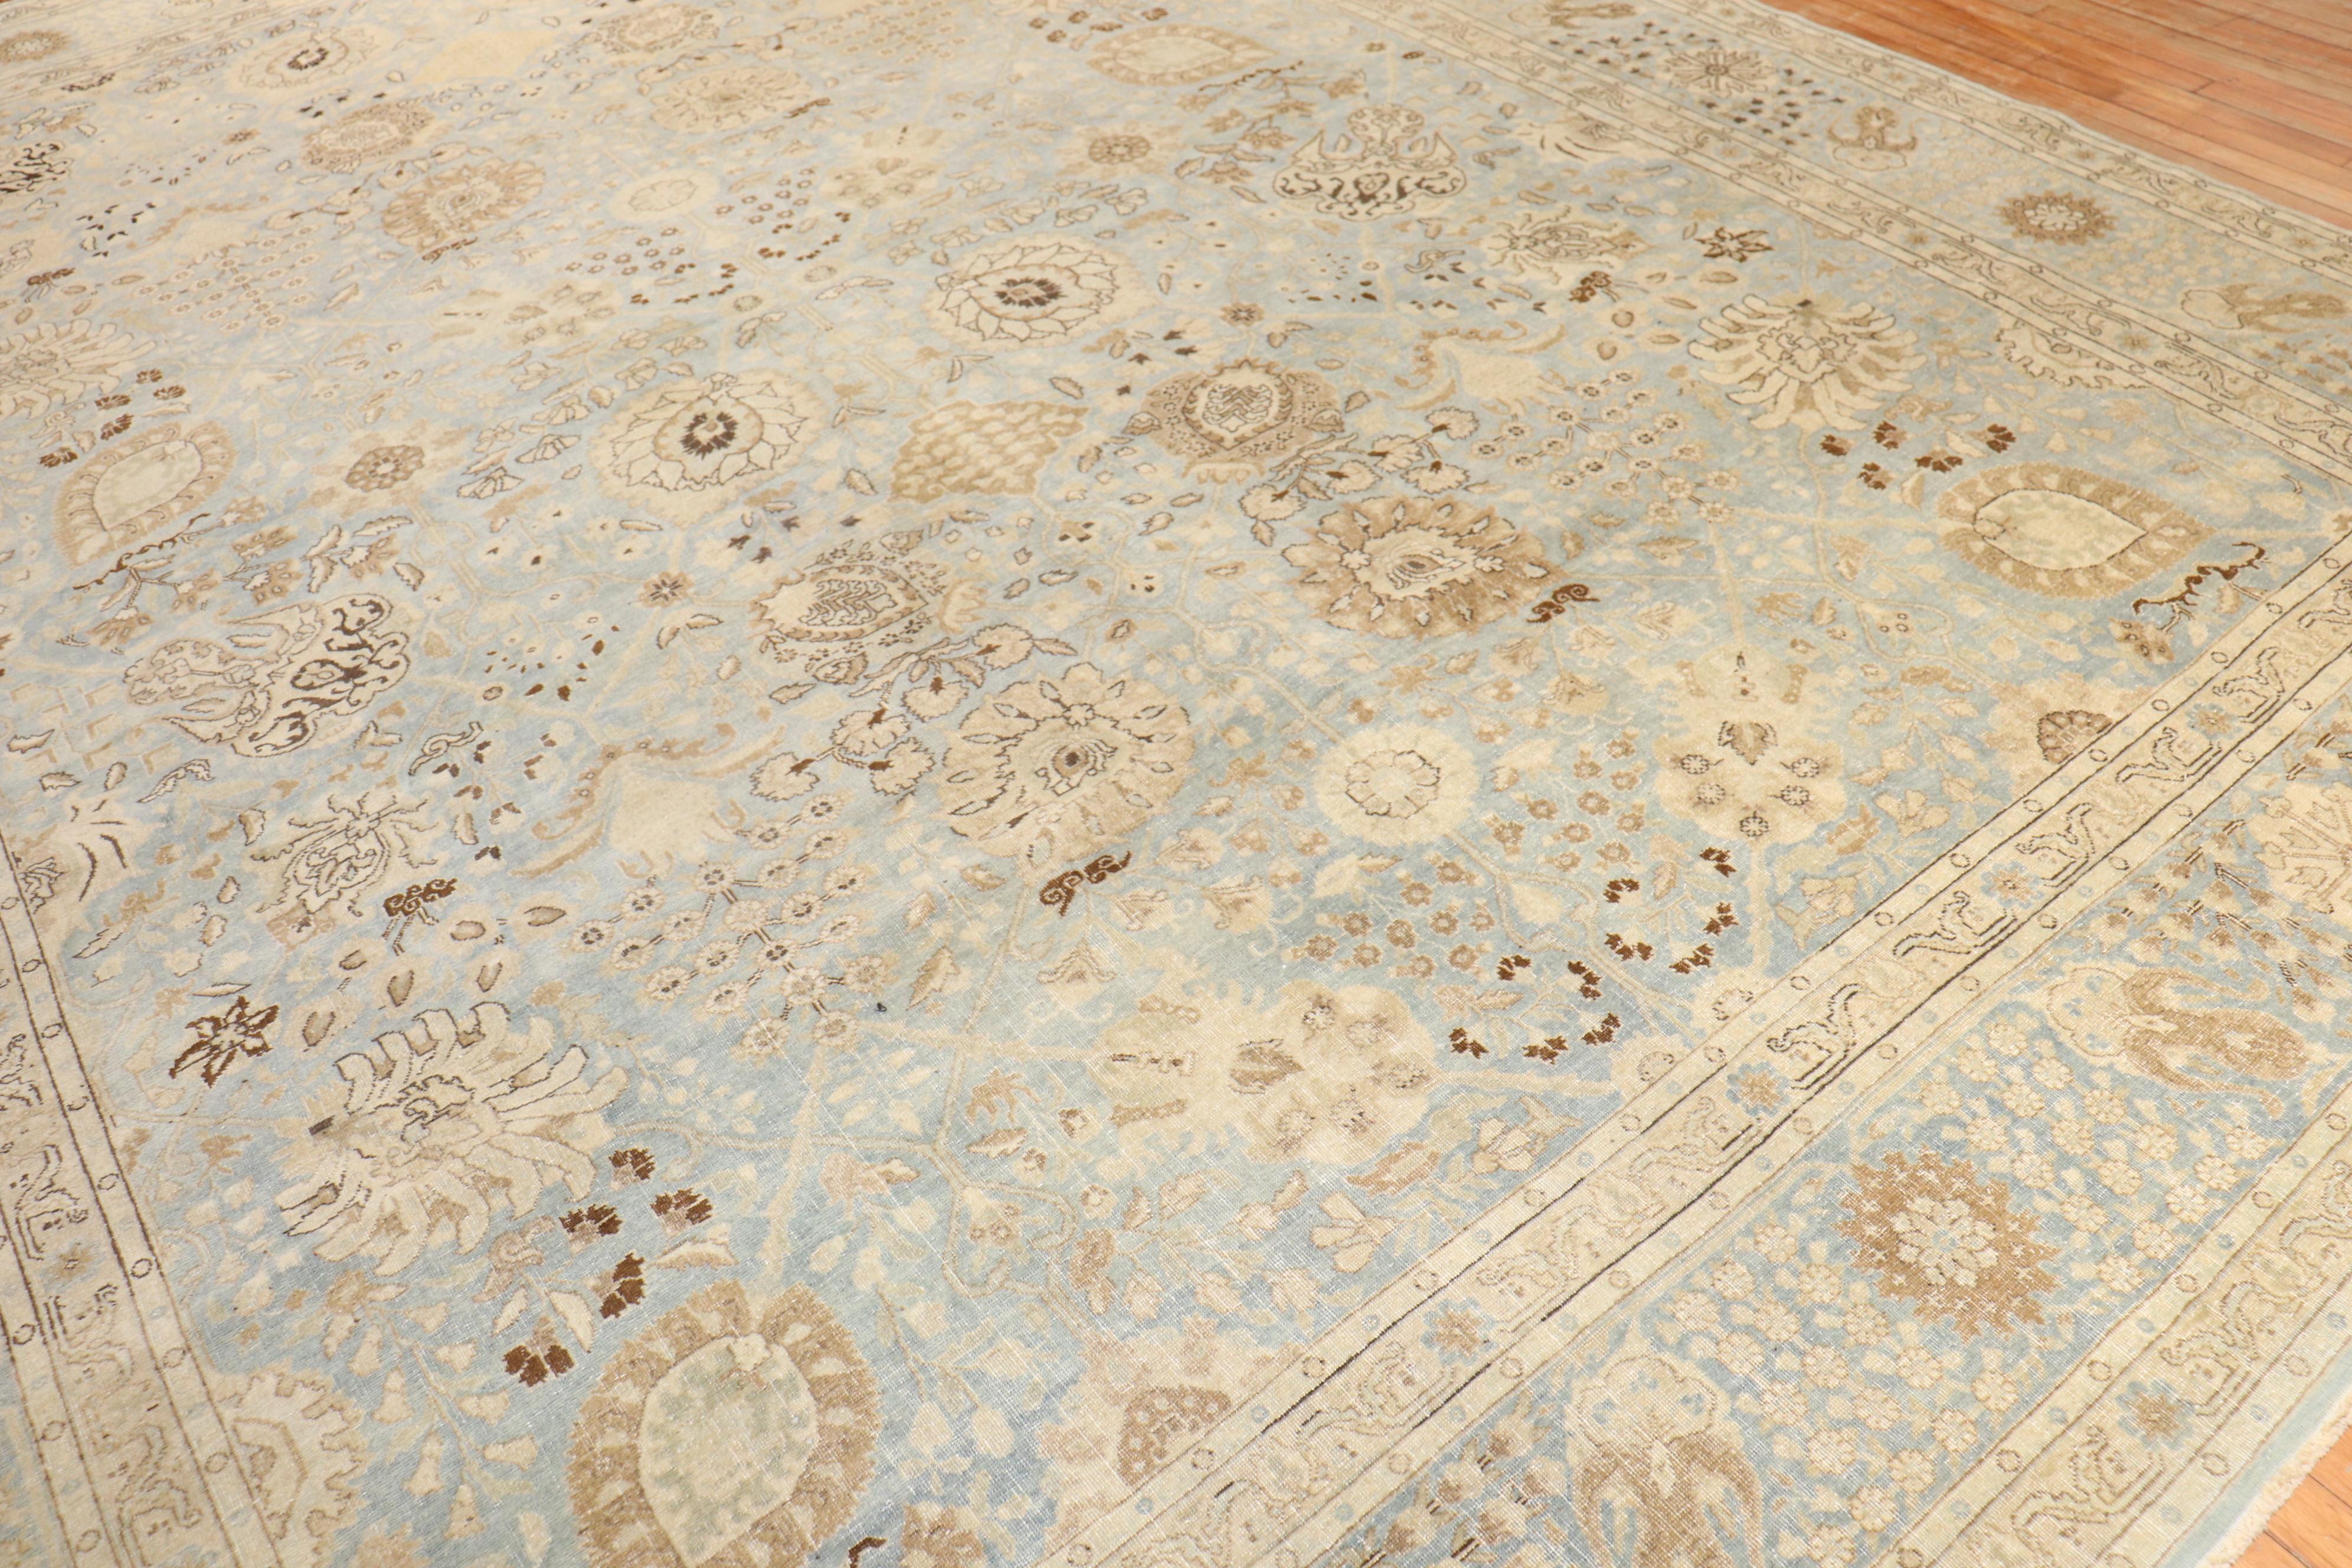 An early 20th Century Persian Tabriz rug with an elegant all over design on a light blue ground. Dominant accents in ivory, brown and yellow

10'10'' x 14'6''